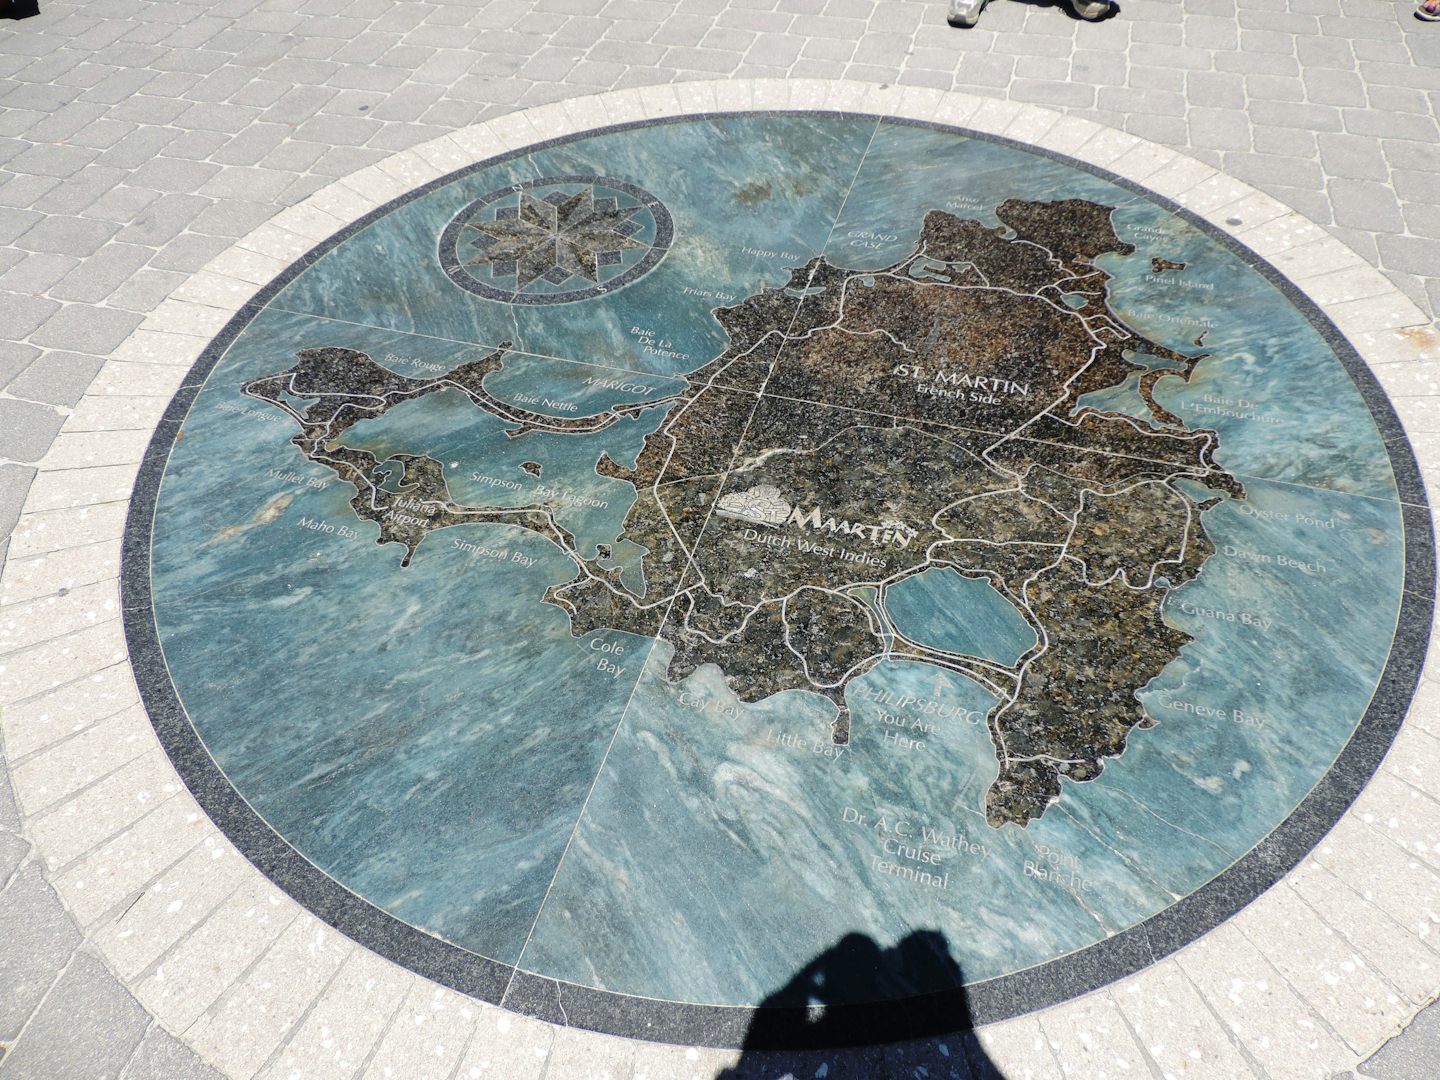 Marble and granite ground map of St-Maarten